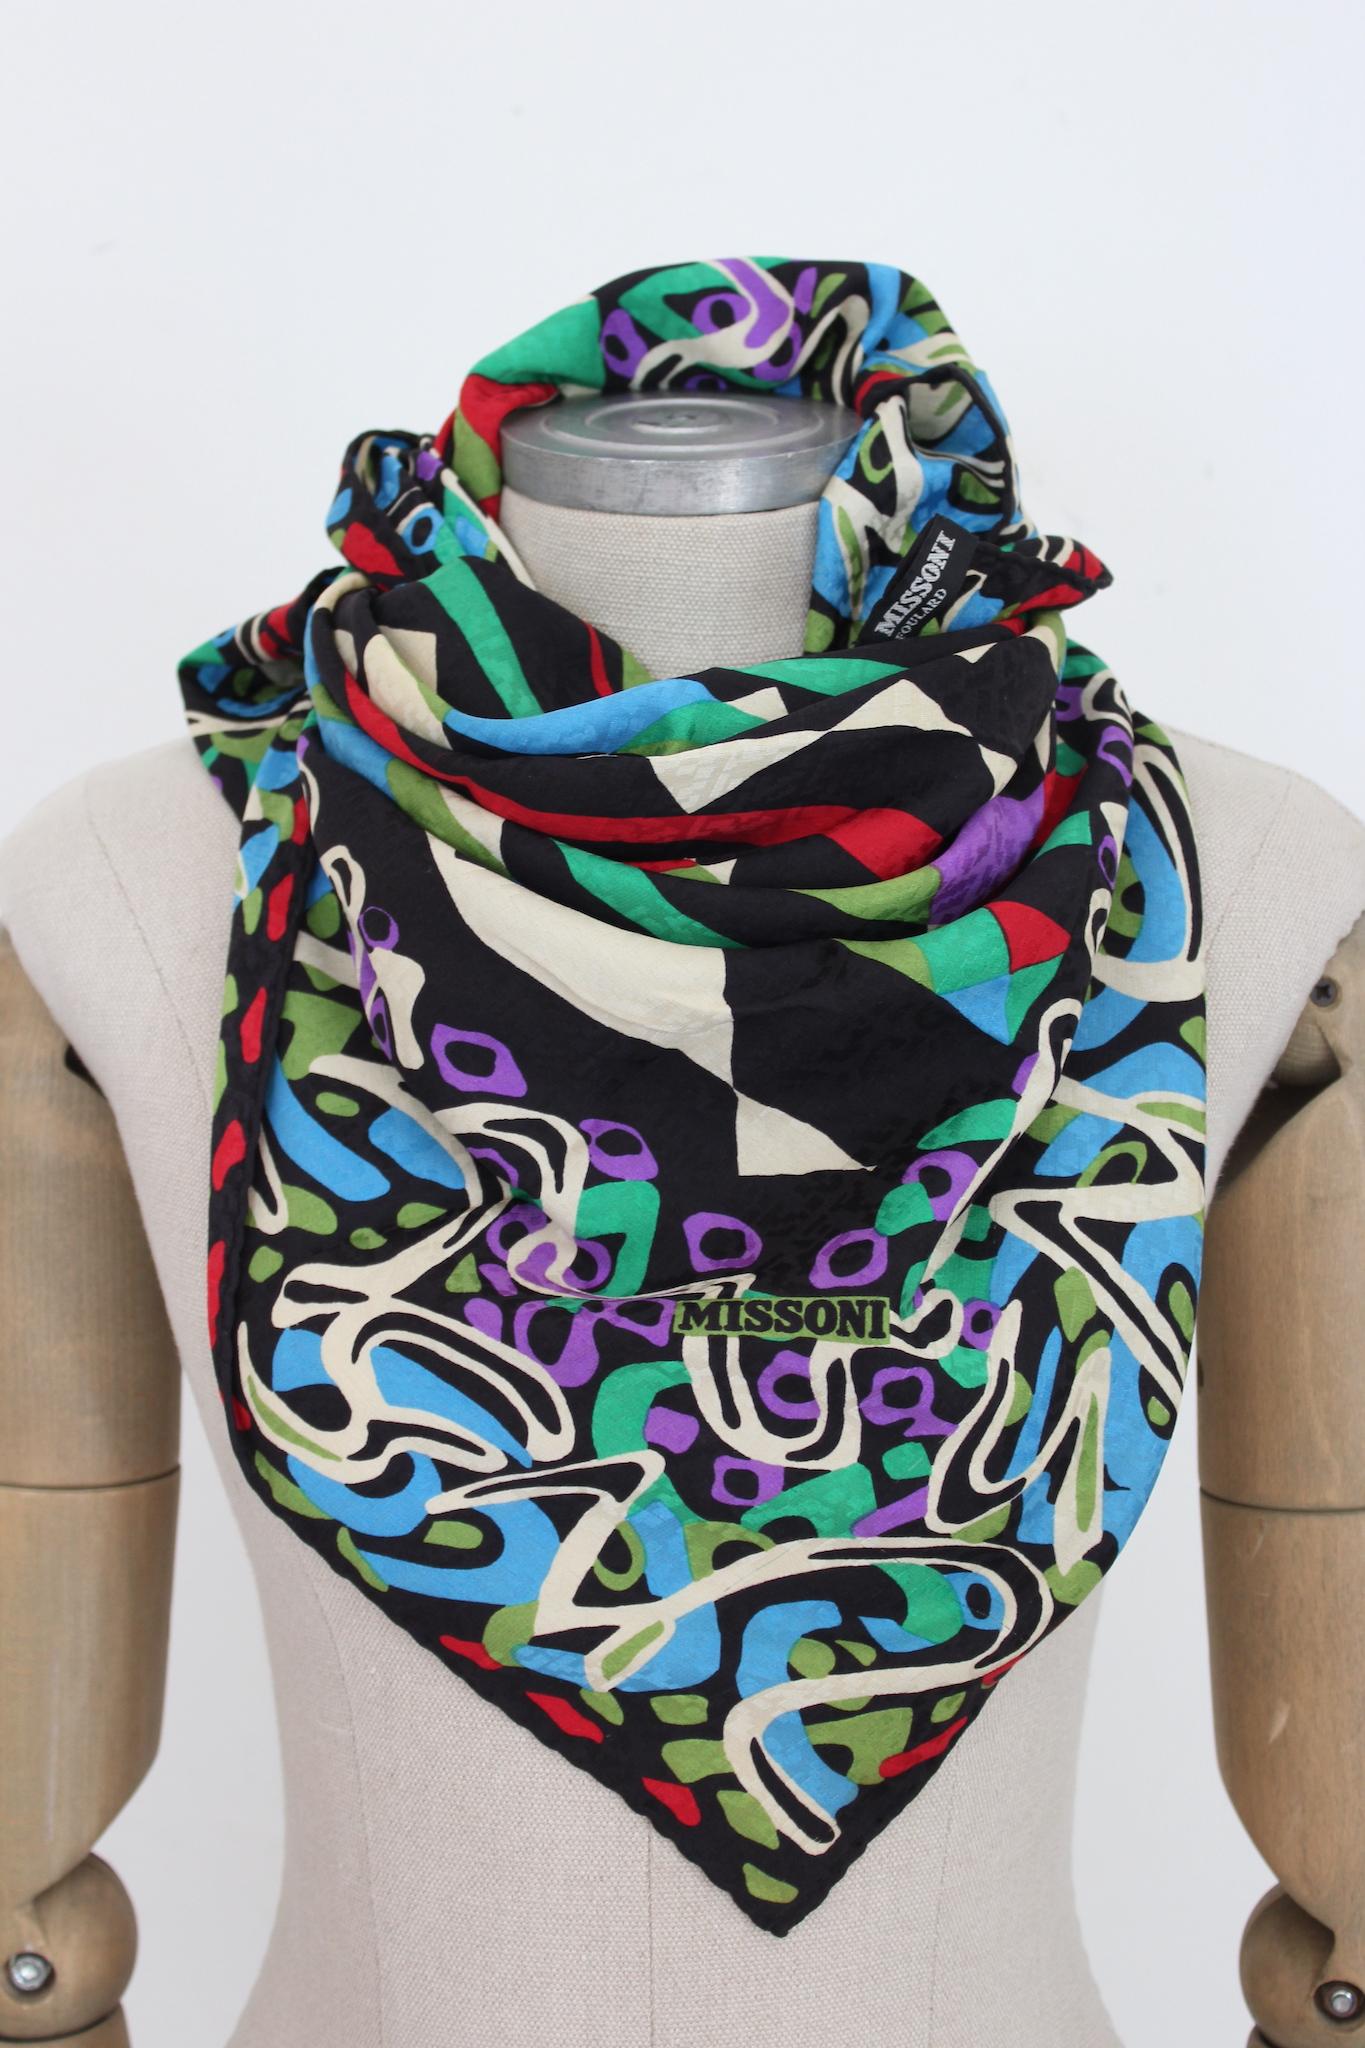 Missoni beautiful vintage 90s multicolor silk scarf. Bright colors from red, blue, green and purple that you can wear with any type of outfit. Made in Italy.

Measures: 83 x 90 cm